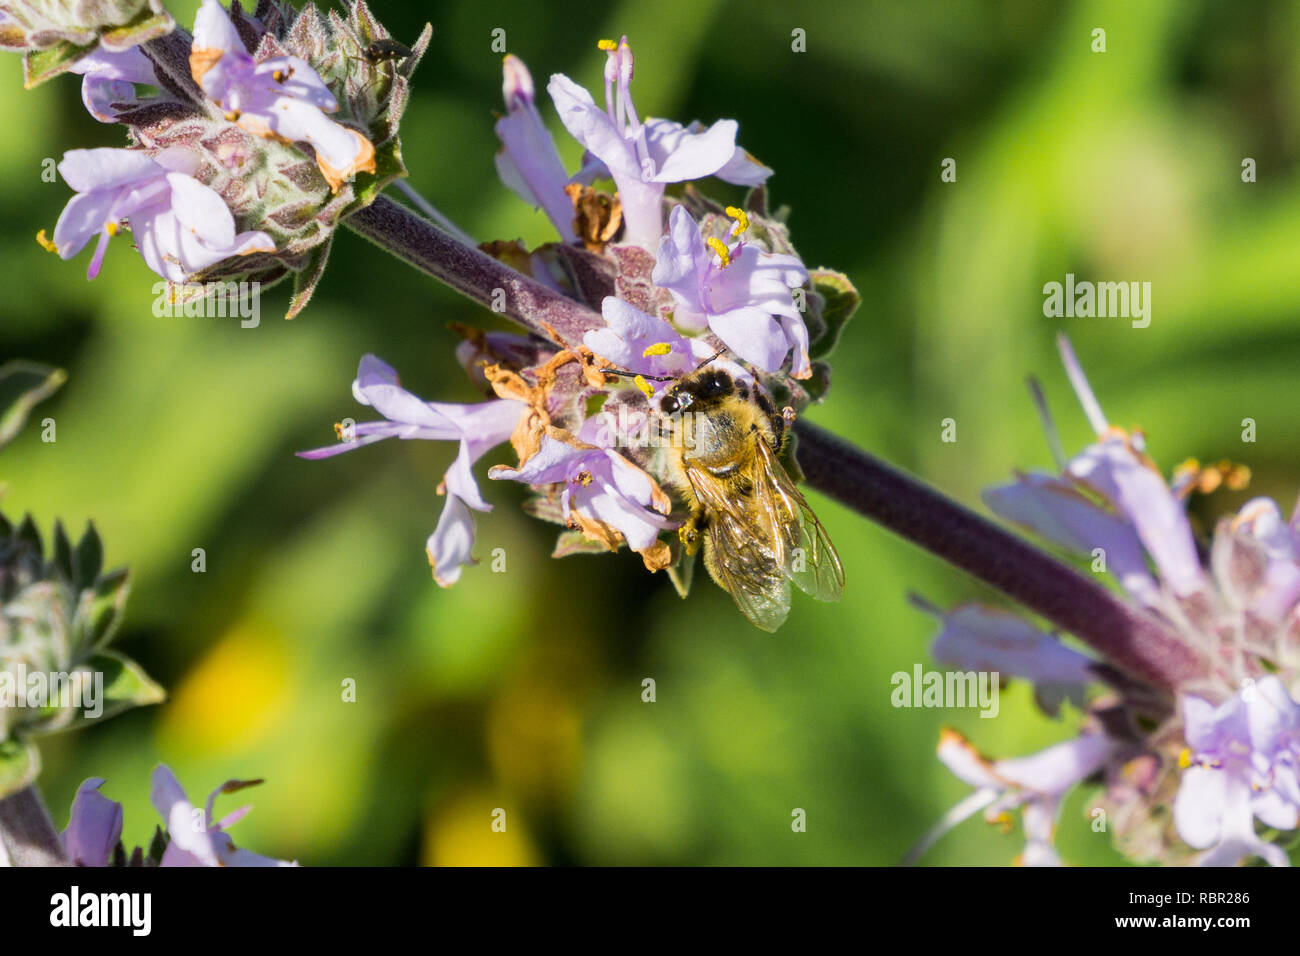 Honey bee gathering nectar from Cleveland sage (Salvia clevelandii) flowers in spring, California Stock Photo